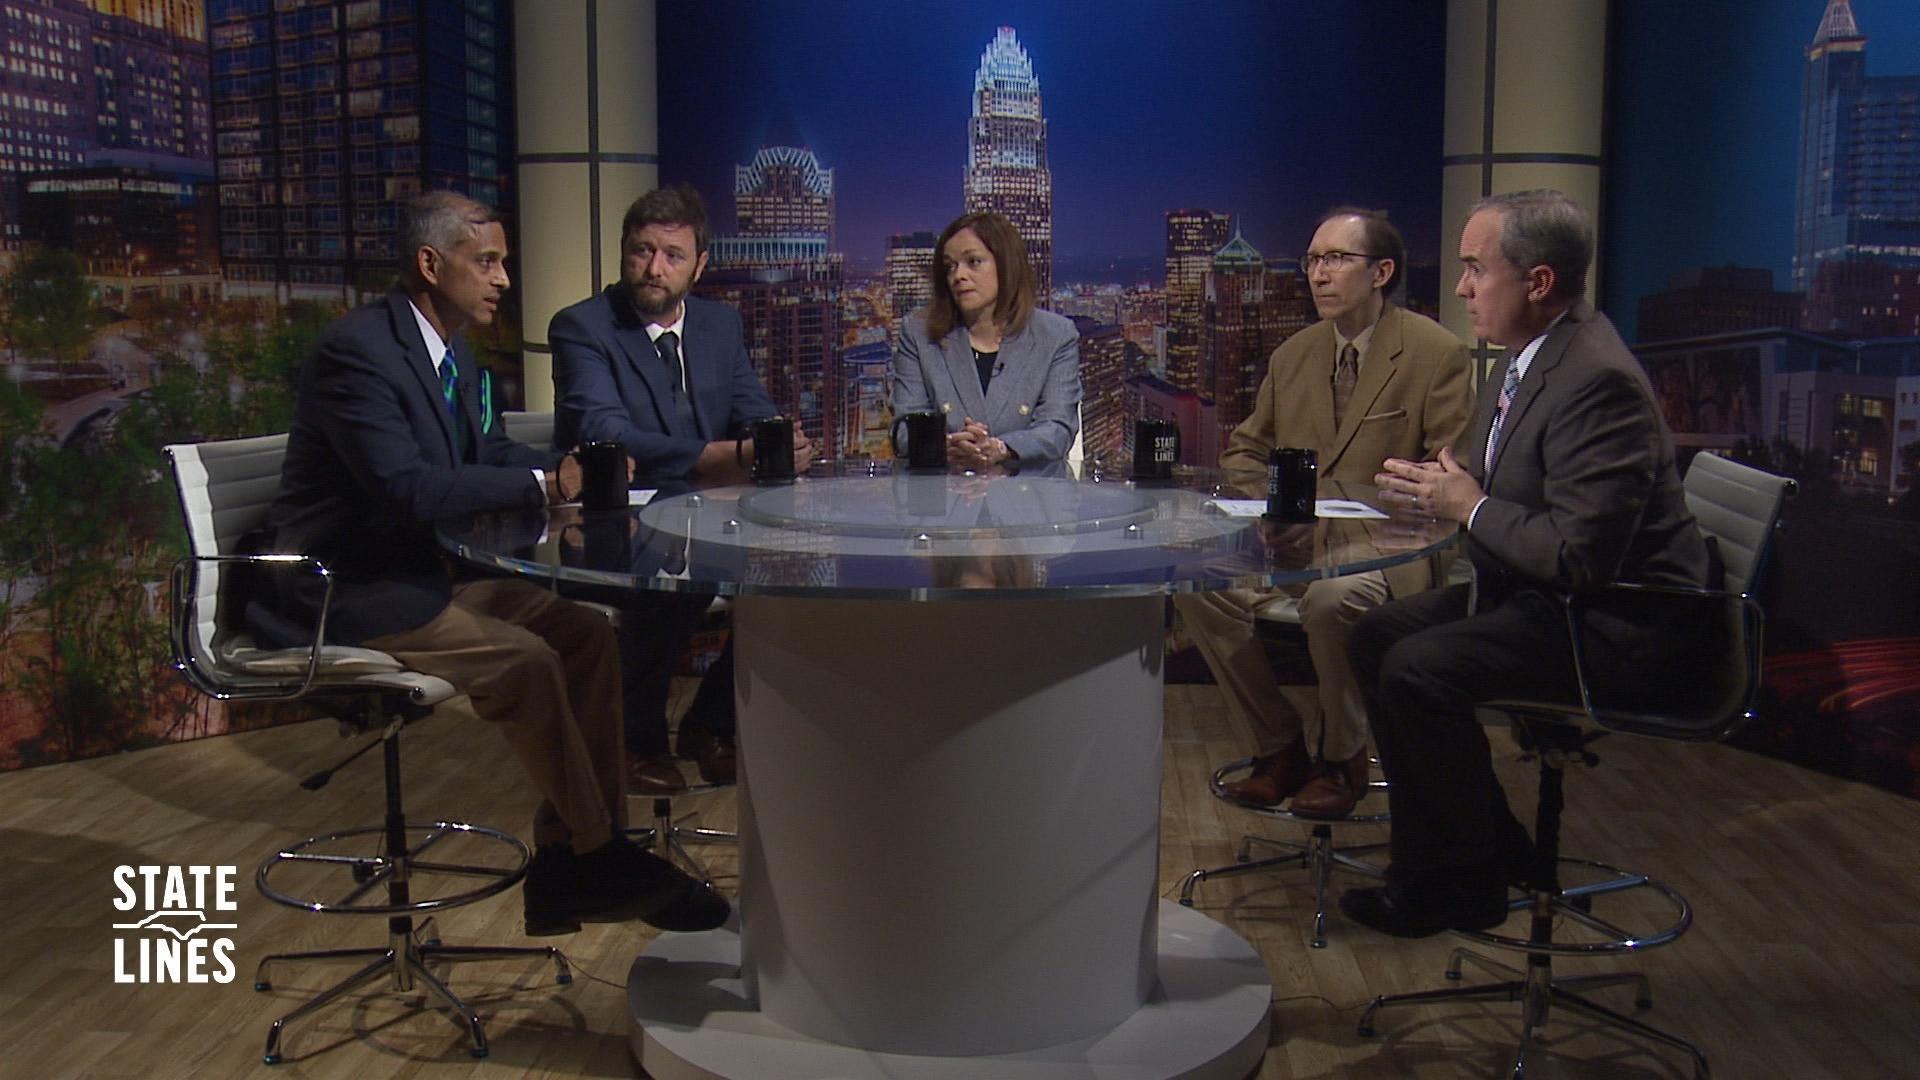 State Lines host Kelly McCullen and panelists sit at a round table on the set of State Lines